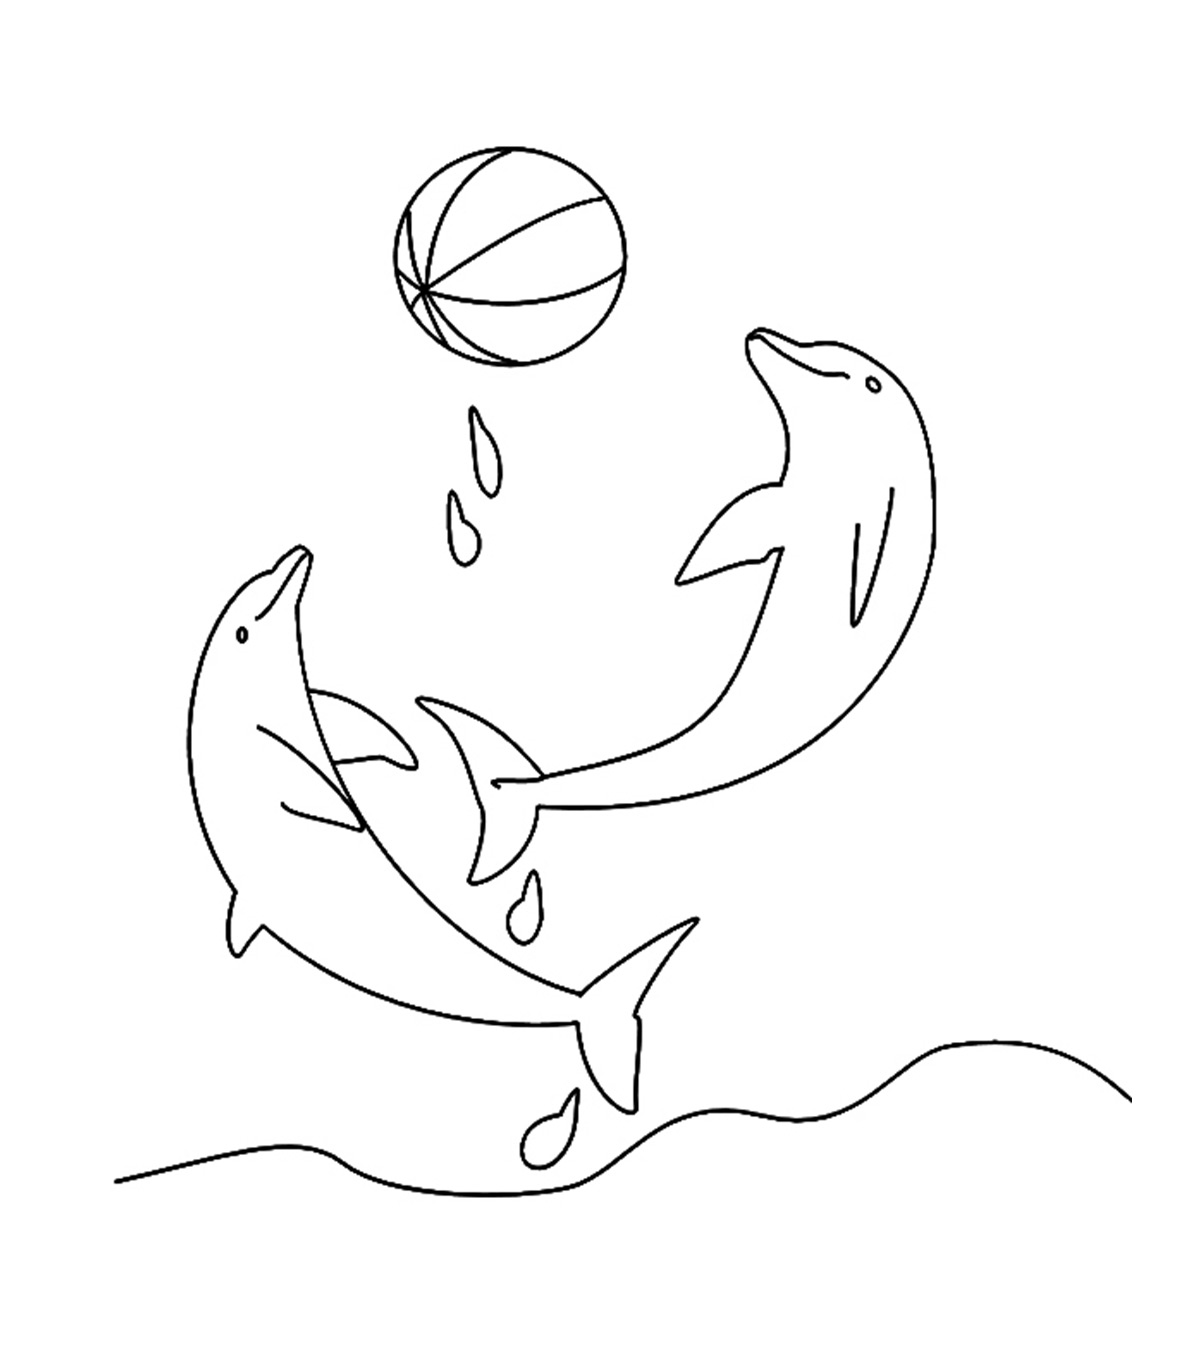 dolphin coloring sheets four dolphins coloring page free printable coloring pages dolphin coloring sheets 